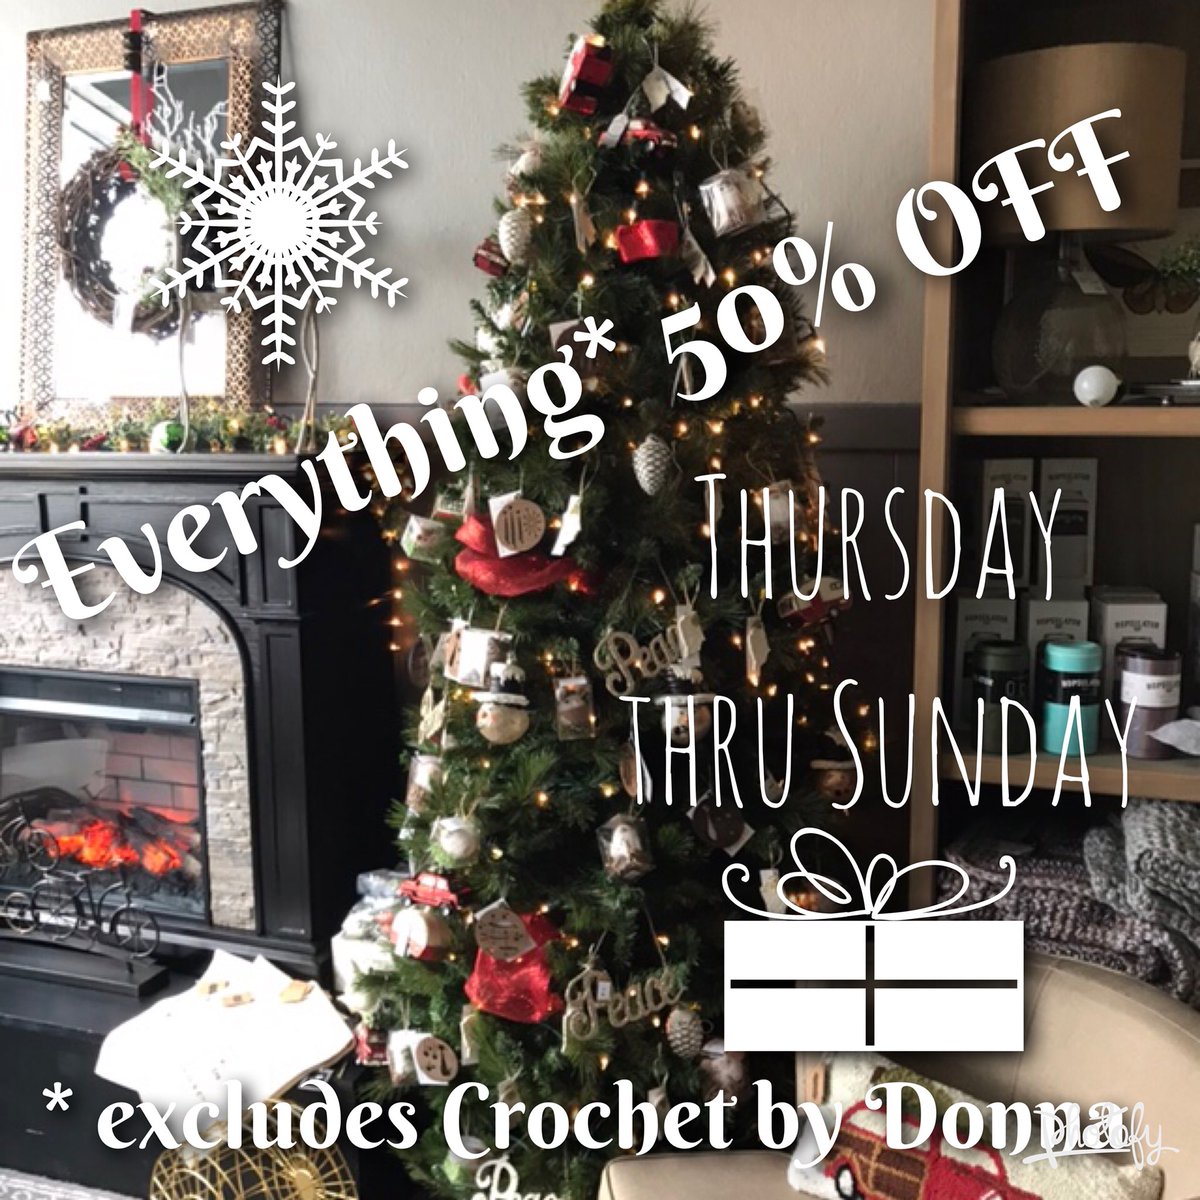 Ok, friends...this may be my last week OPEN! Everything (excluding Crochet by Donna)  will be 50% Off!!! This is as low as I will go! Come shop! 😊🎄👏🏻
Hours: 
Thursday & Friday 11-6
Saturday 10-2
Sunday 12-4
Follow @sagehomestore #sage #sagehomestore #danvilleindiana